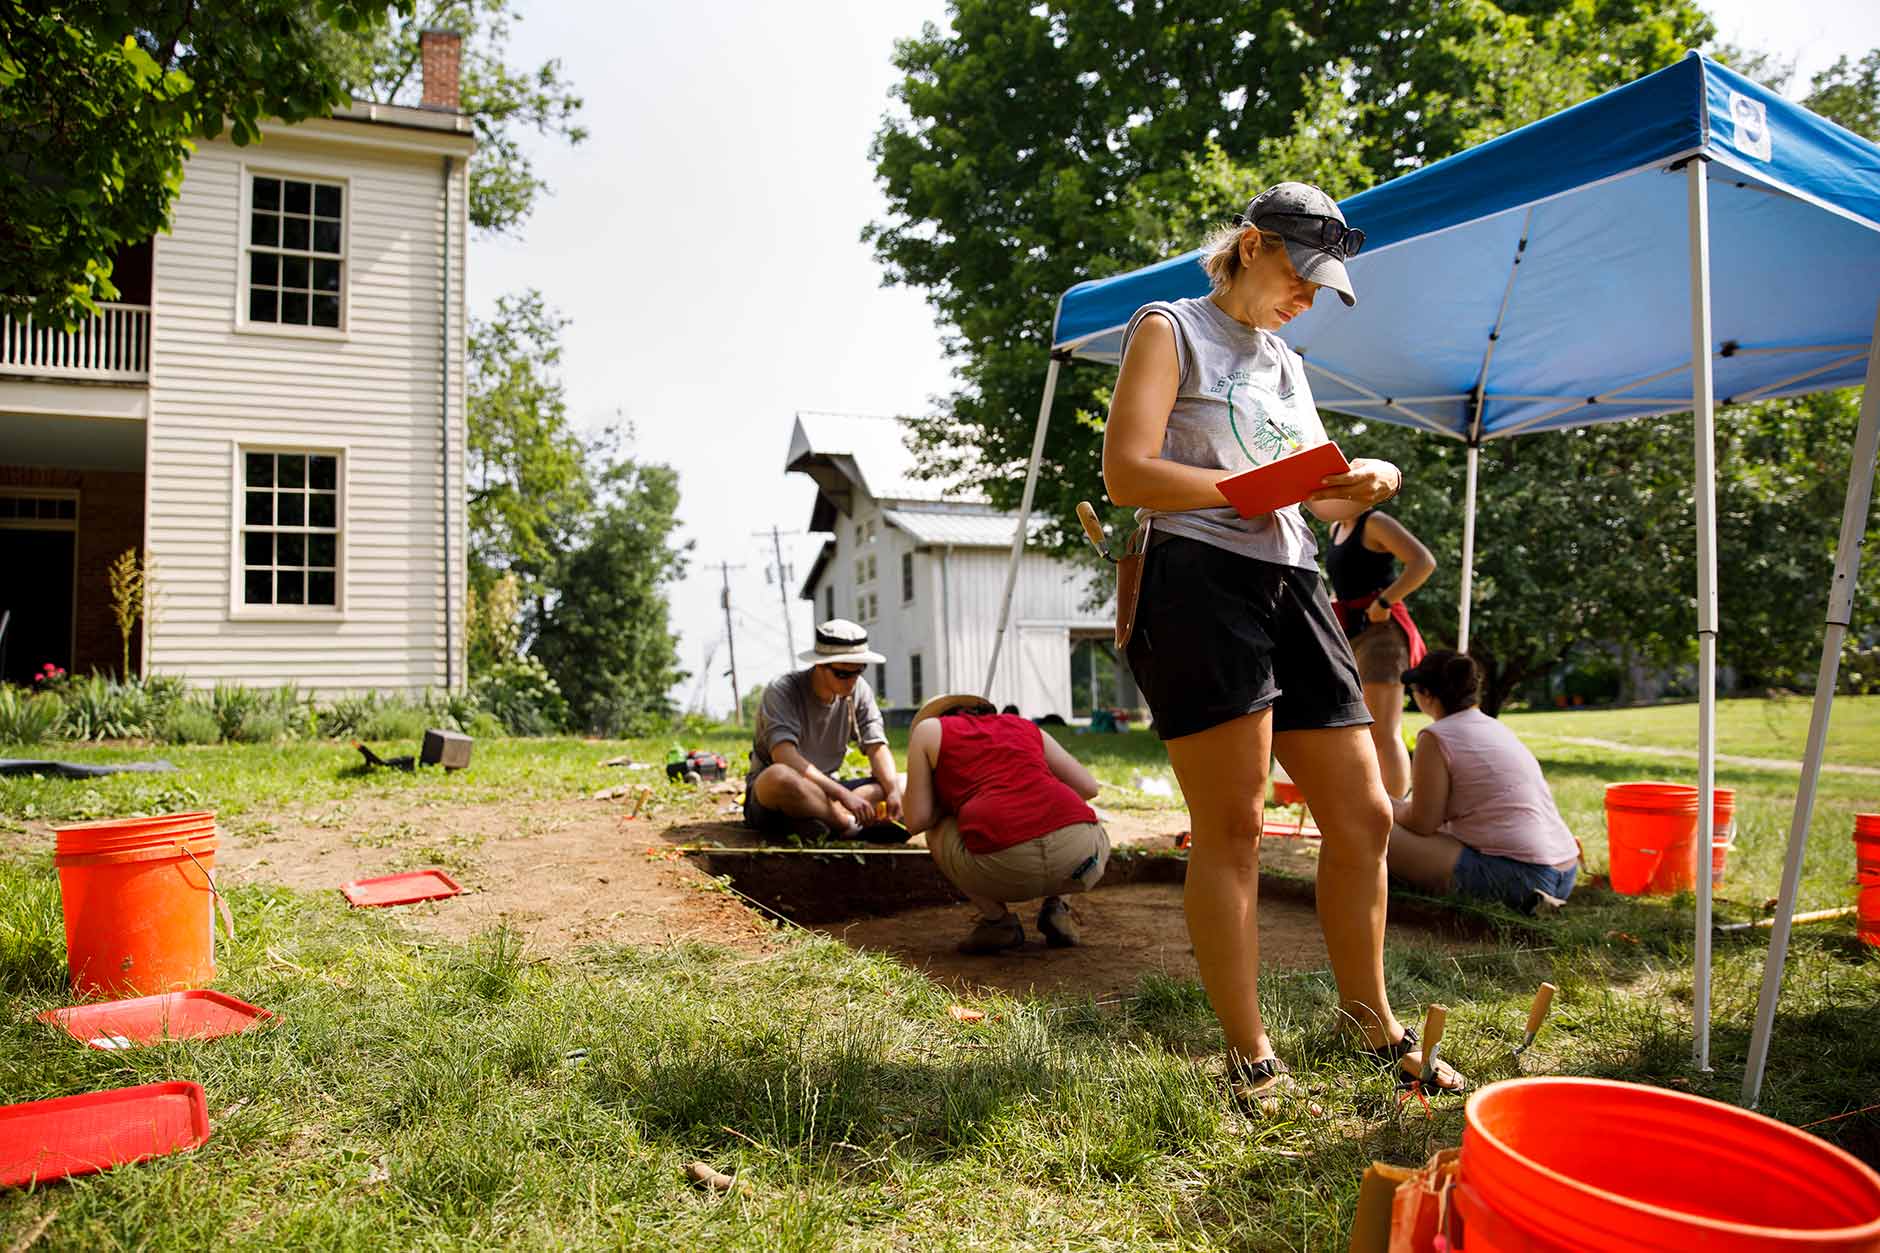 Elizabeth Watts Malouchos, a research scientist at the Indiana University Glenn A. Black Laboratory of Archaeology, takes notes during an archaeological project at Wylie House in Bloomington on Thursday, June 7, 2018. (James Brosher/IU Communications)